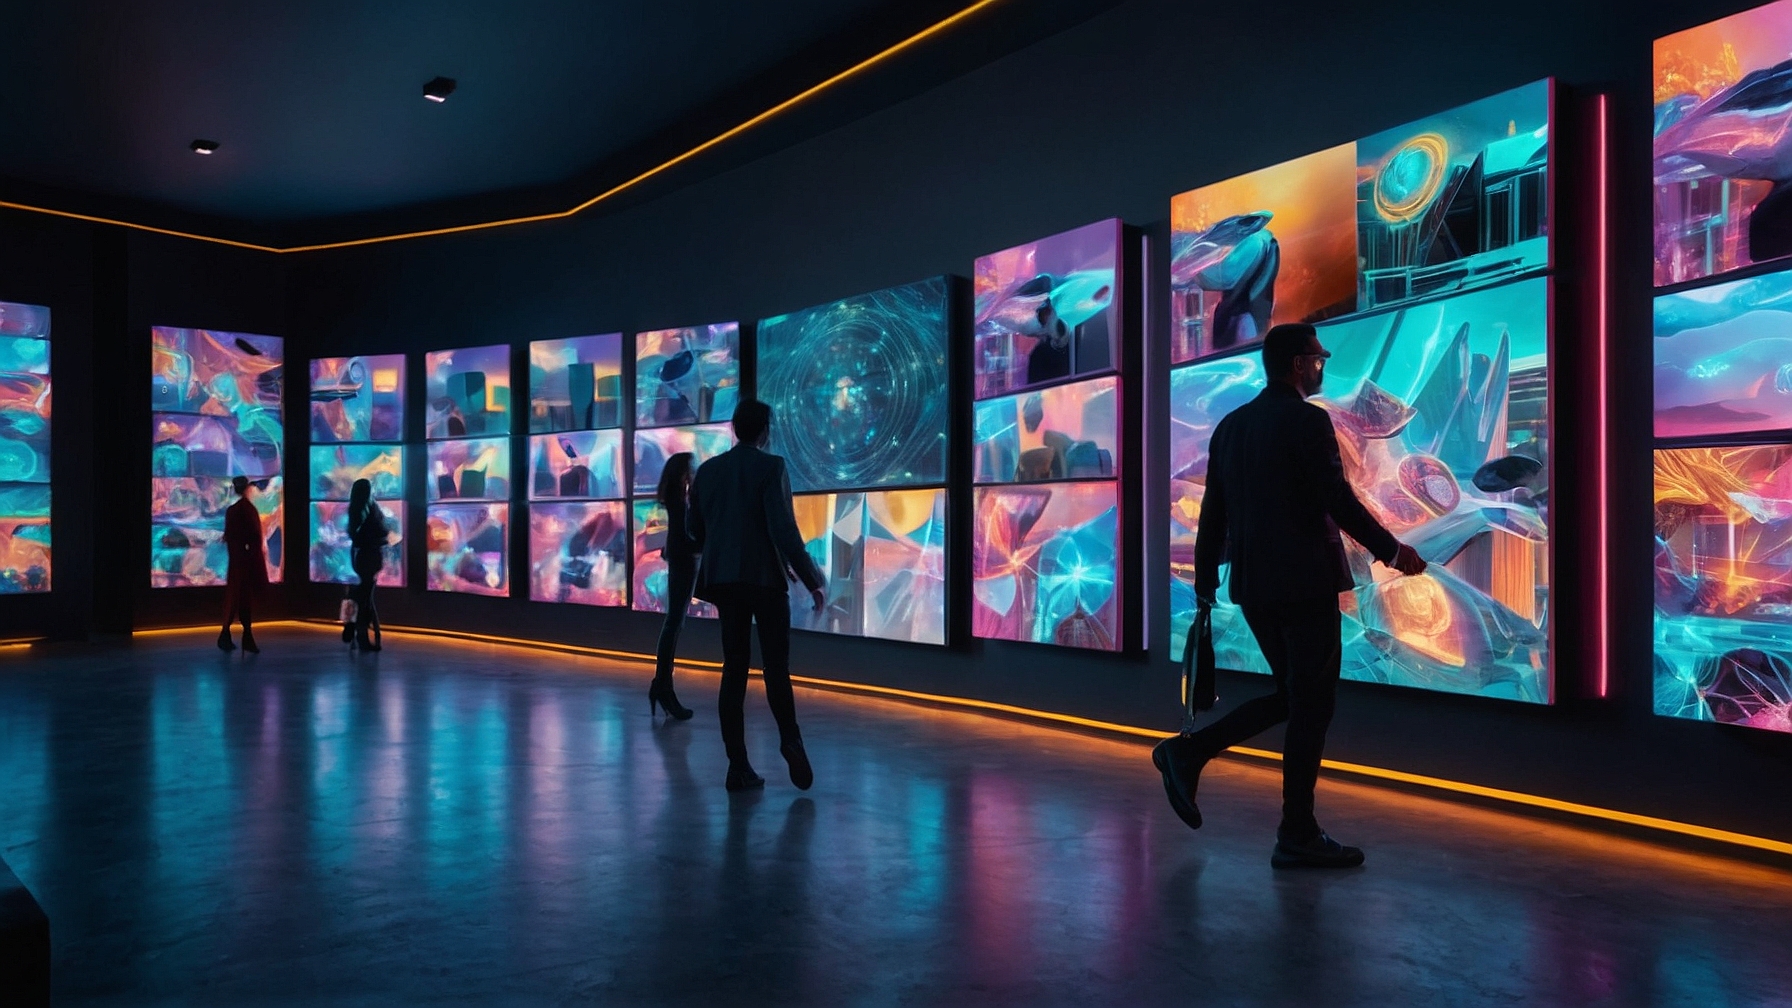 A sleek virtual gallery filled with glowing, animated NFT art pieces, collectors browsing with digital tokens in hand ready for instant blockchain transactions.